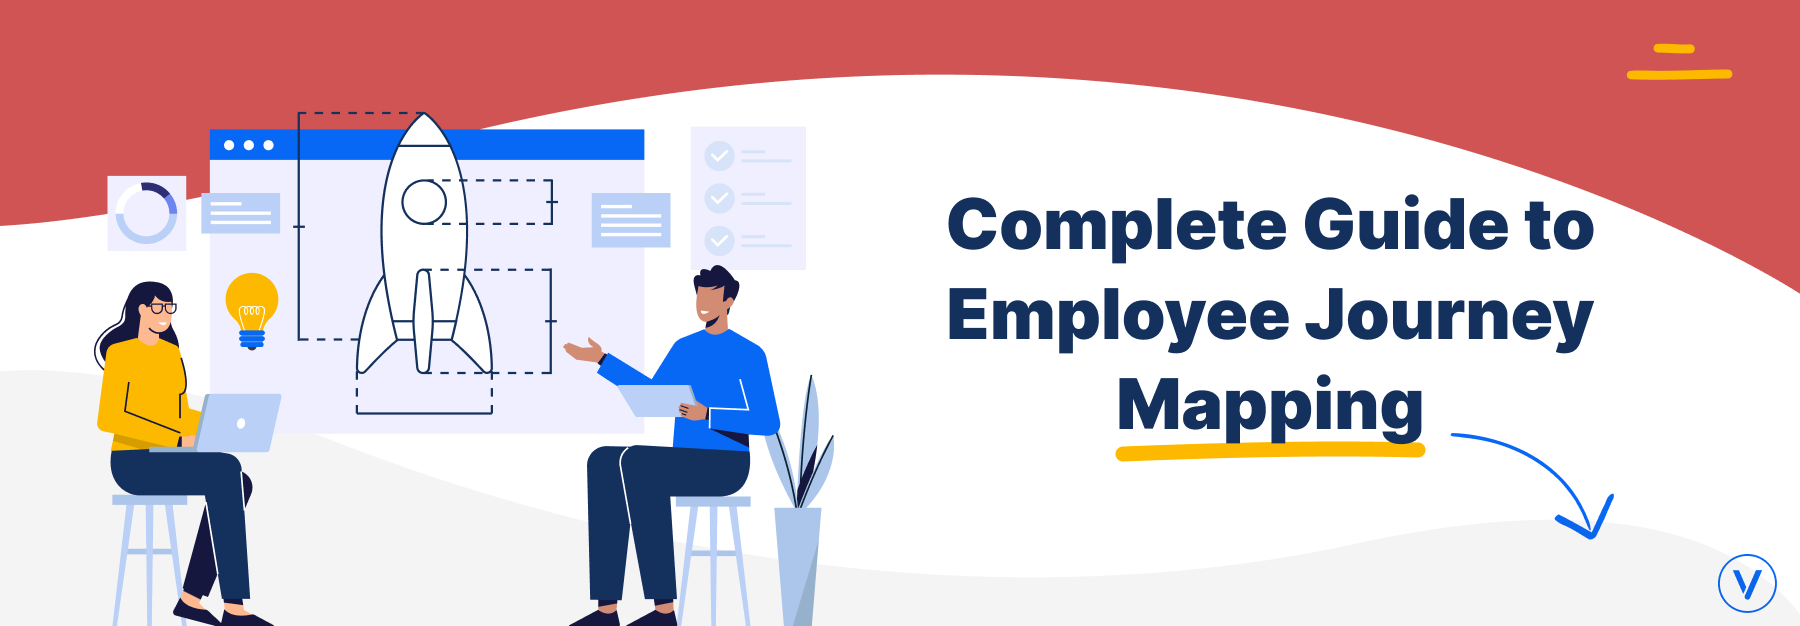 Complete Guide To Employee Journey Mapping